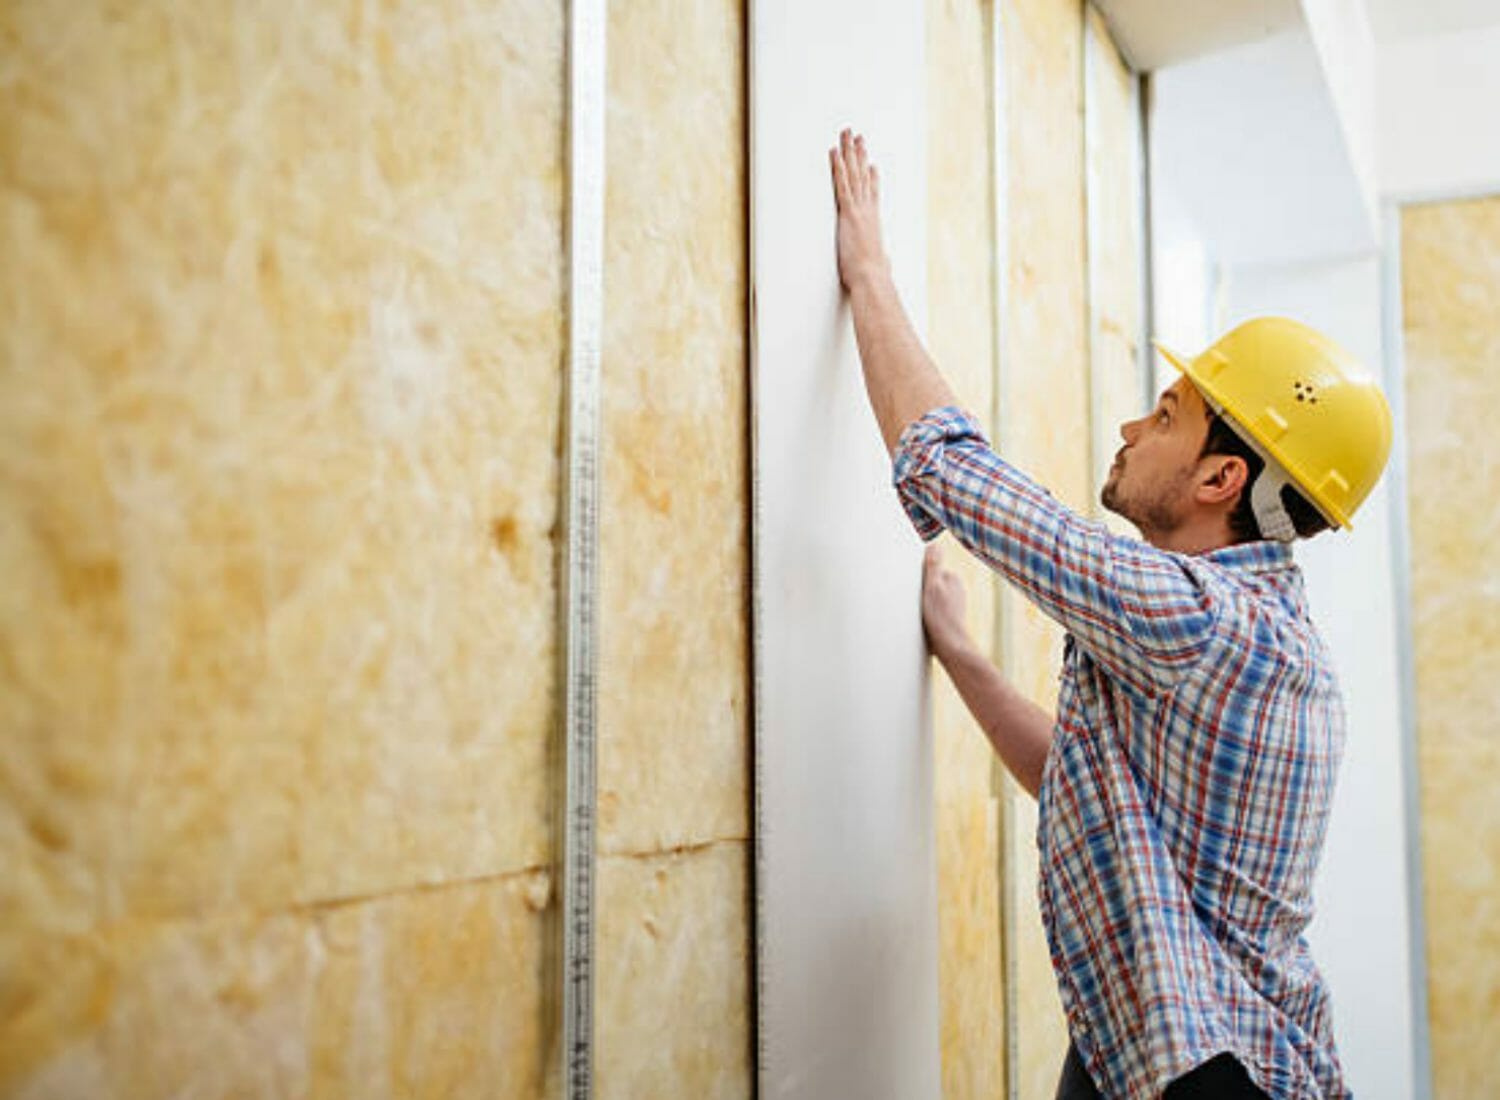 Drywall and the construction industry